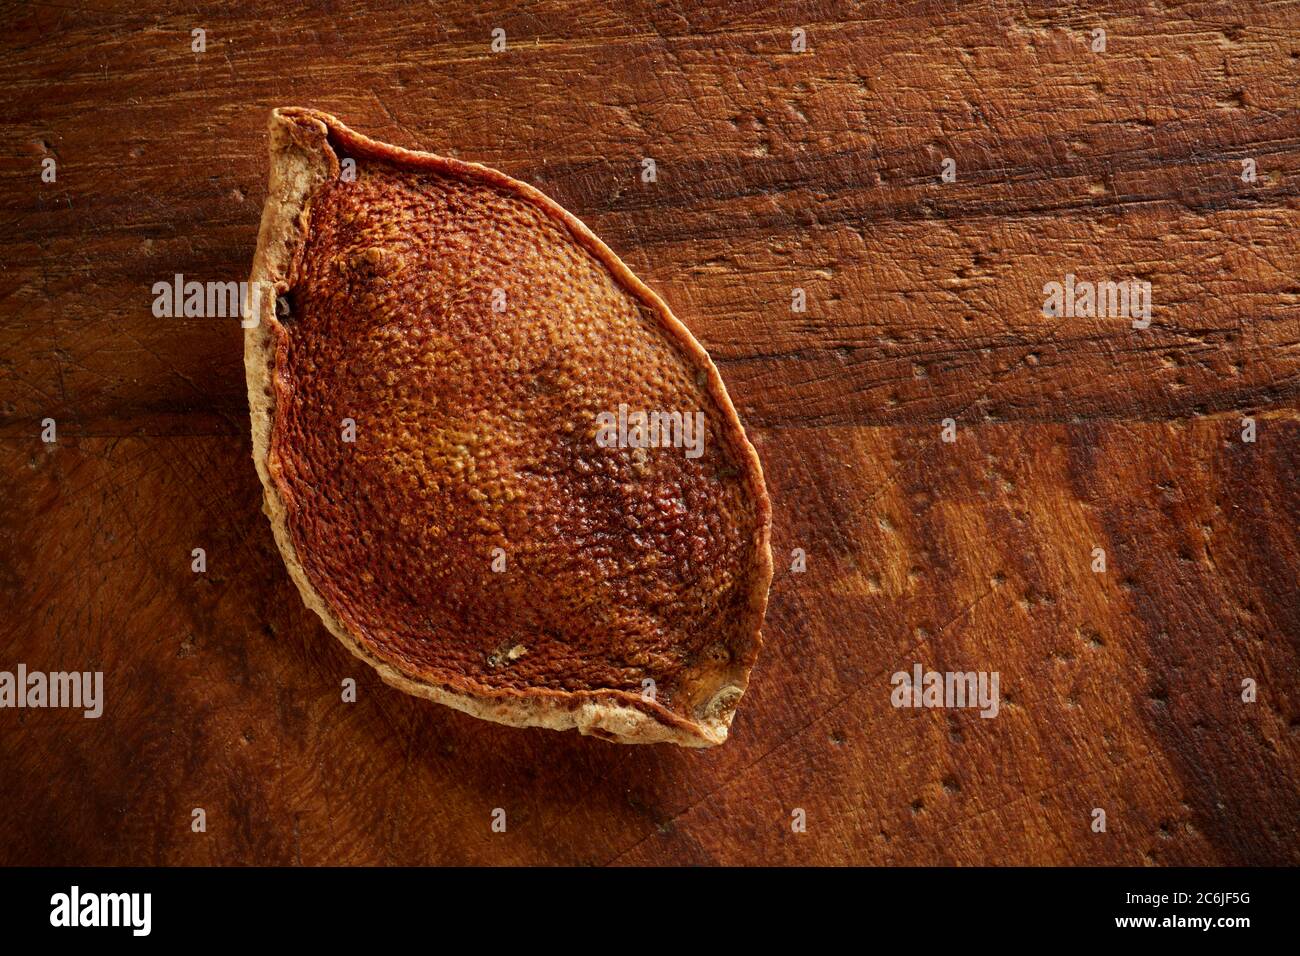 Single piece of dried orange rind on old wooden board. Stock Photo